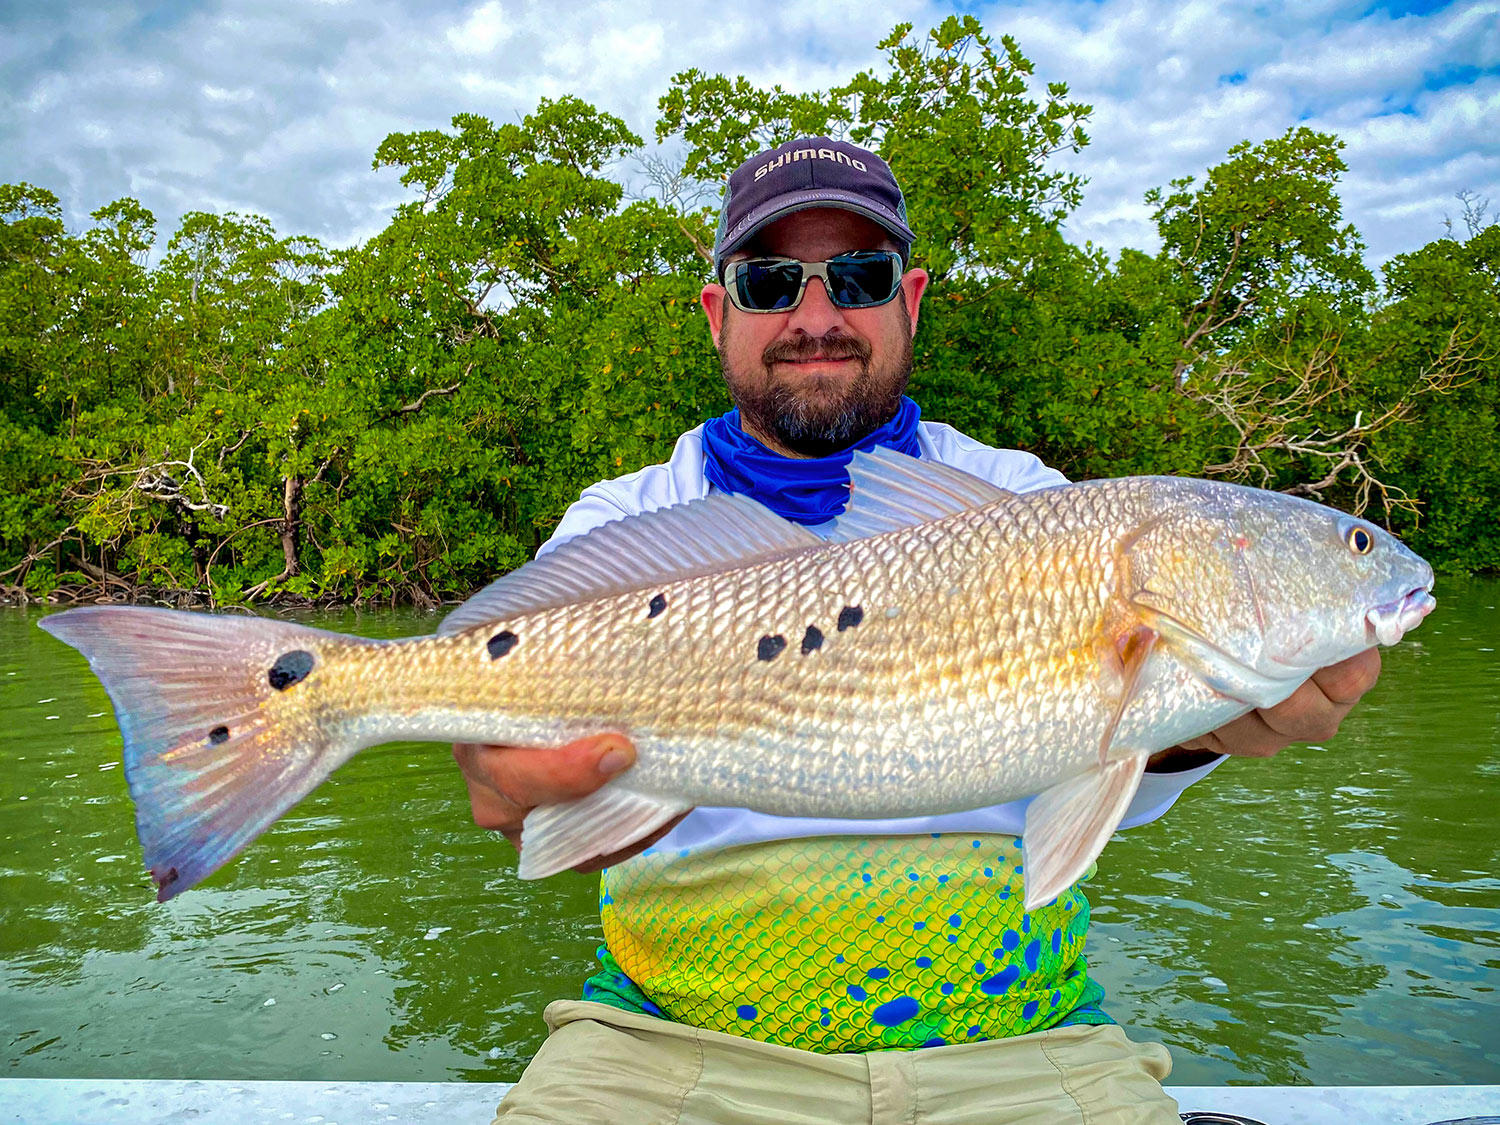 Redfish caught on an Everwater Charters & Tours Inshore Fishing Charter in the Ten Thousand Islands, Florida